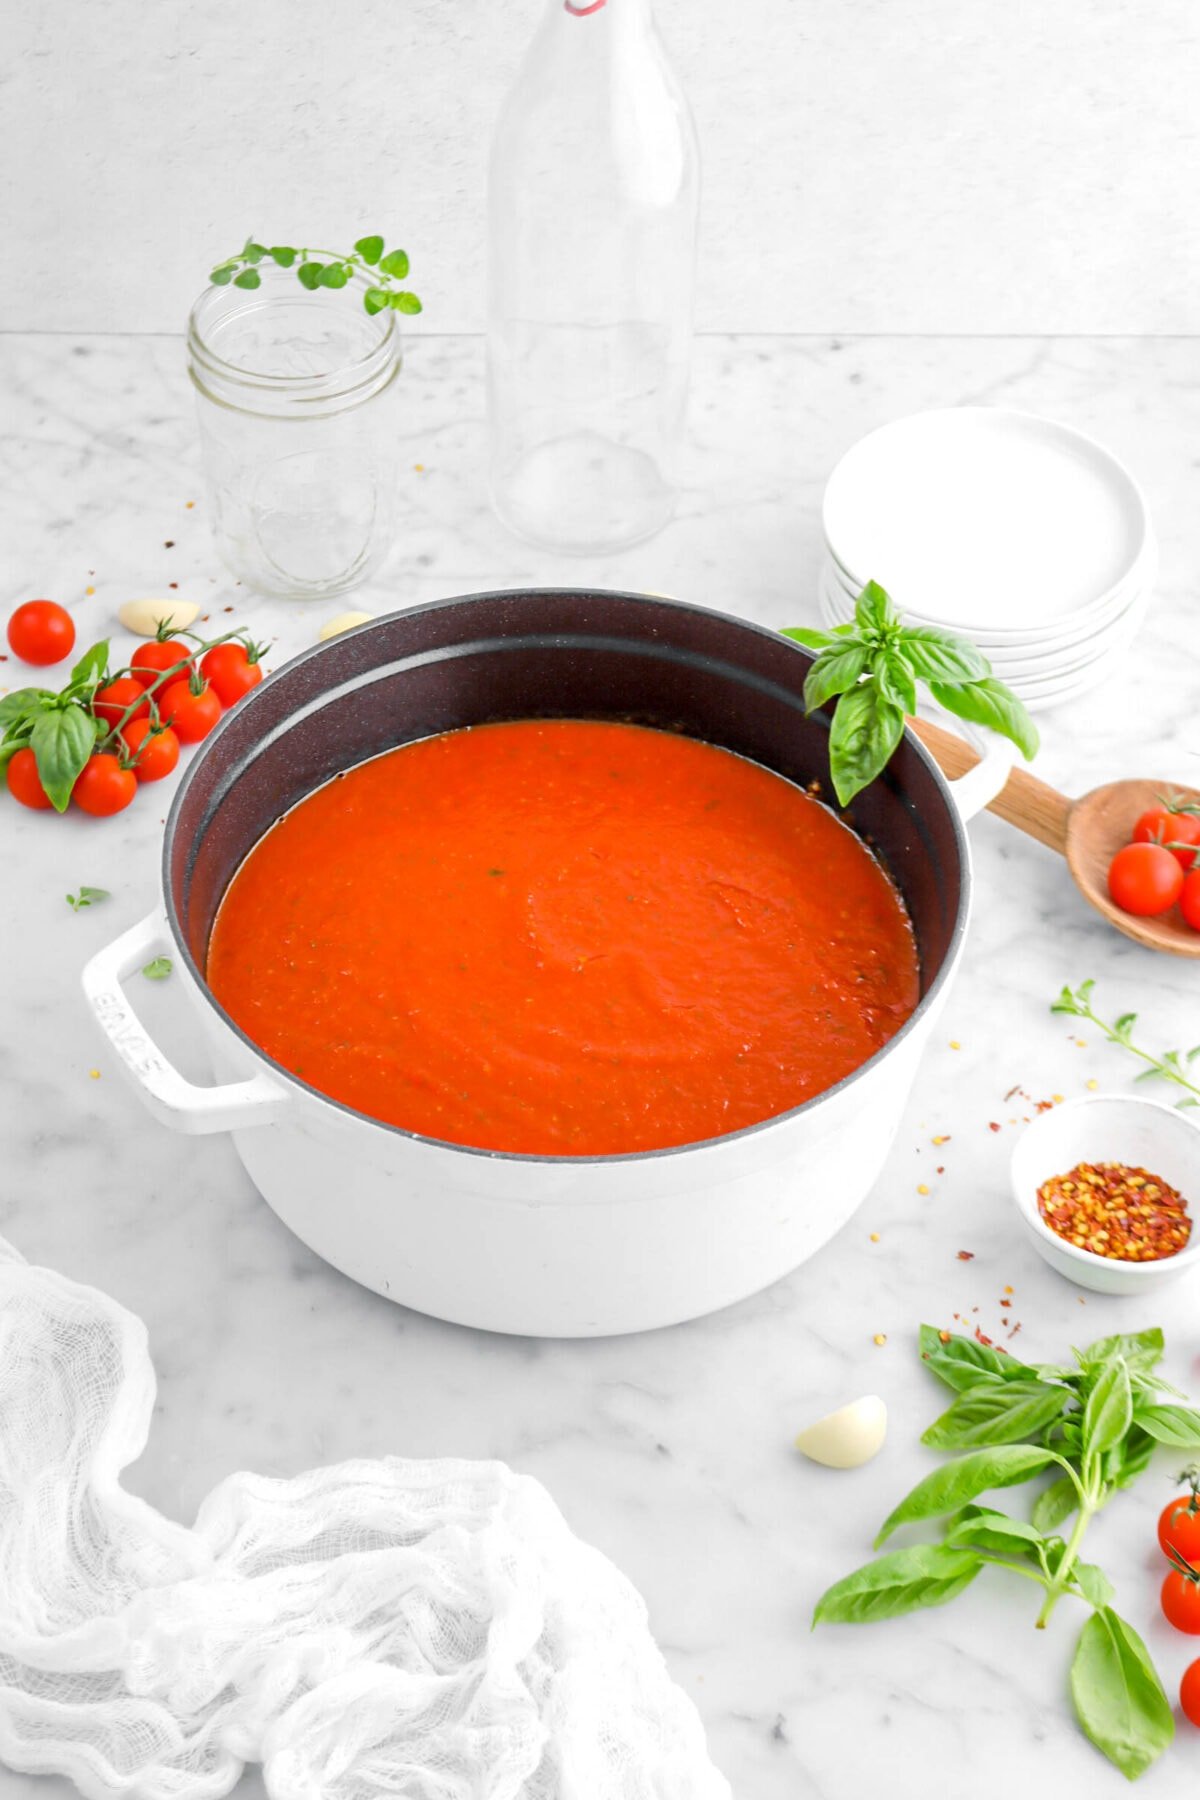 pulled back angled shot of tomato sauce in cast iron pot on marble surface with tomatoes, basil sprigs, bowl of red pepper flakes around, and stack of white plates